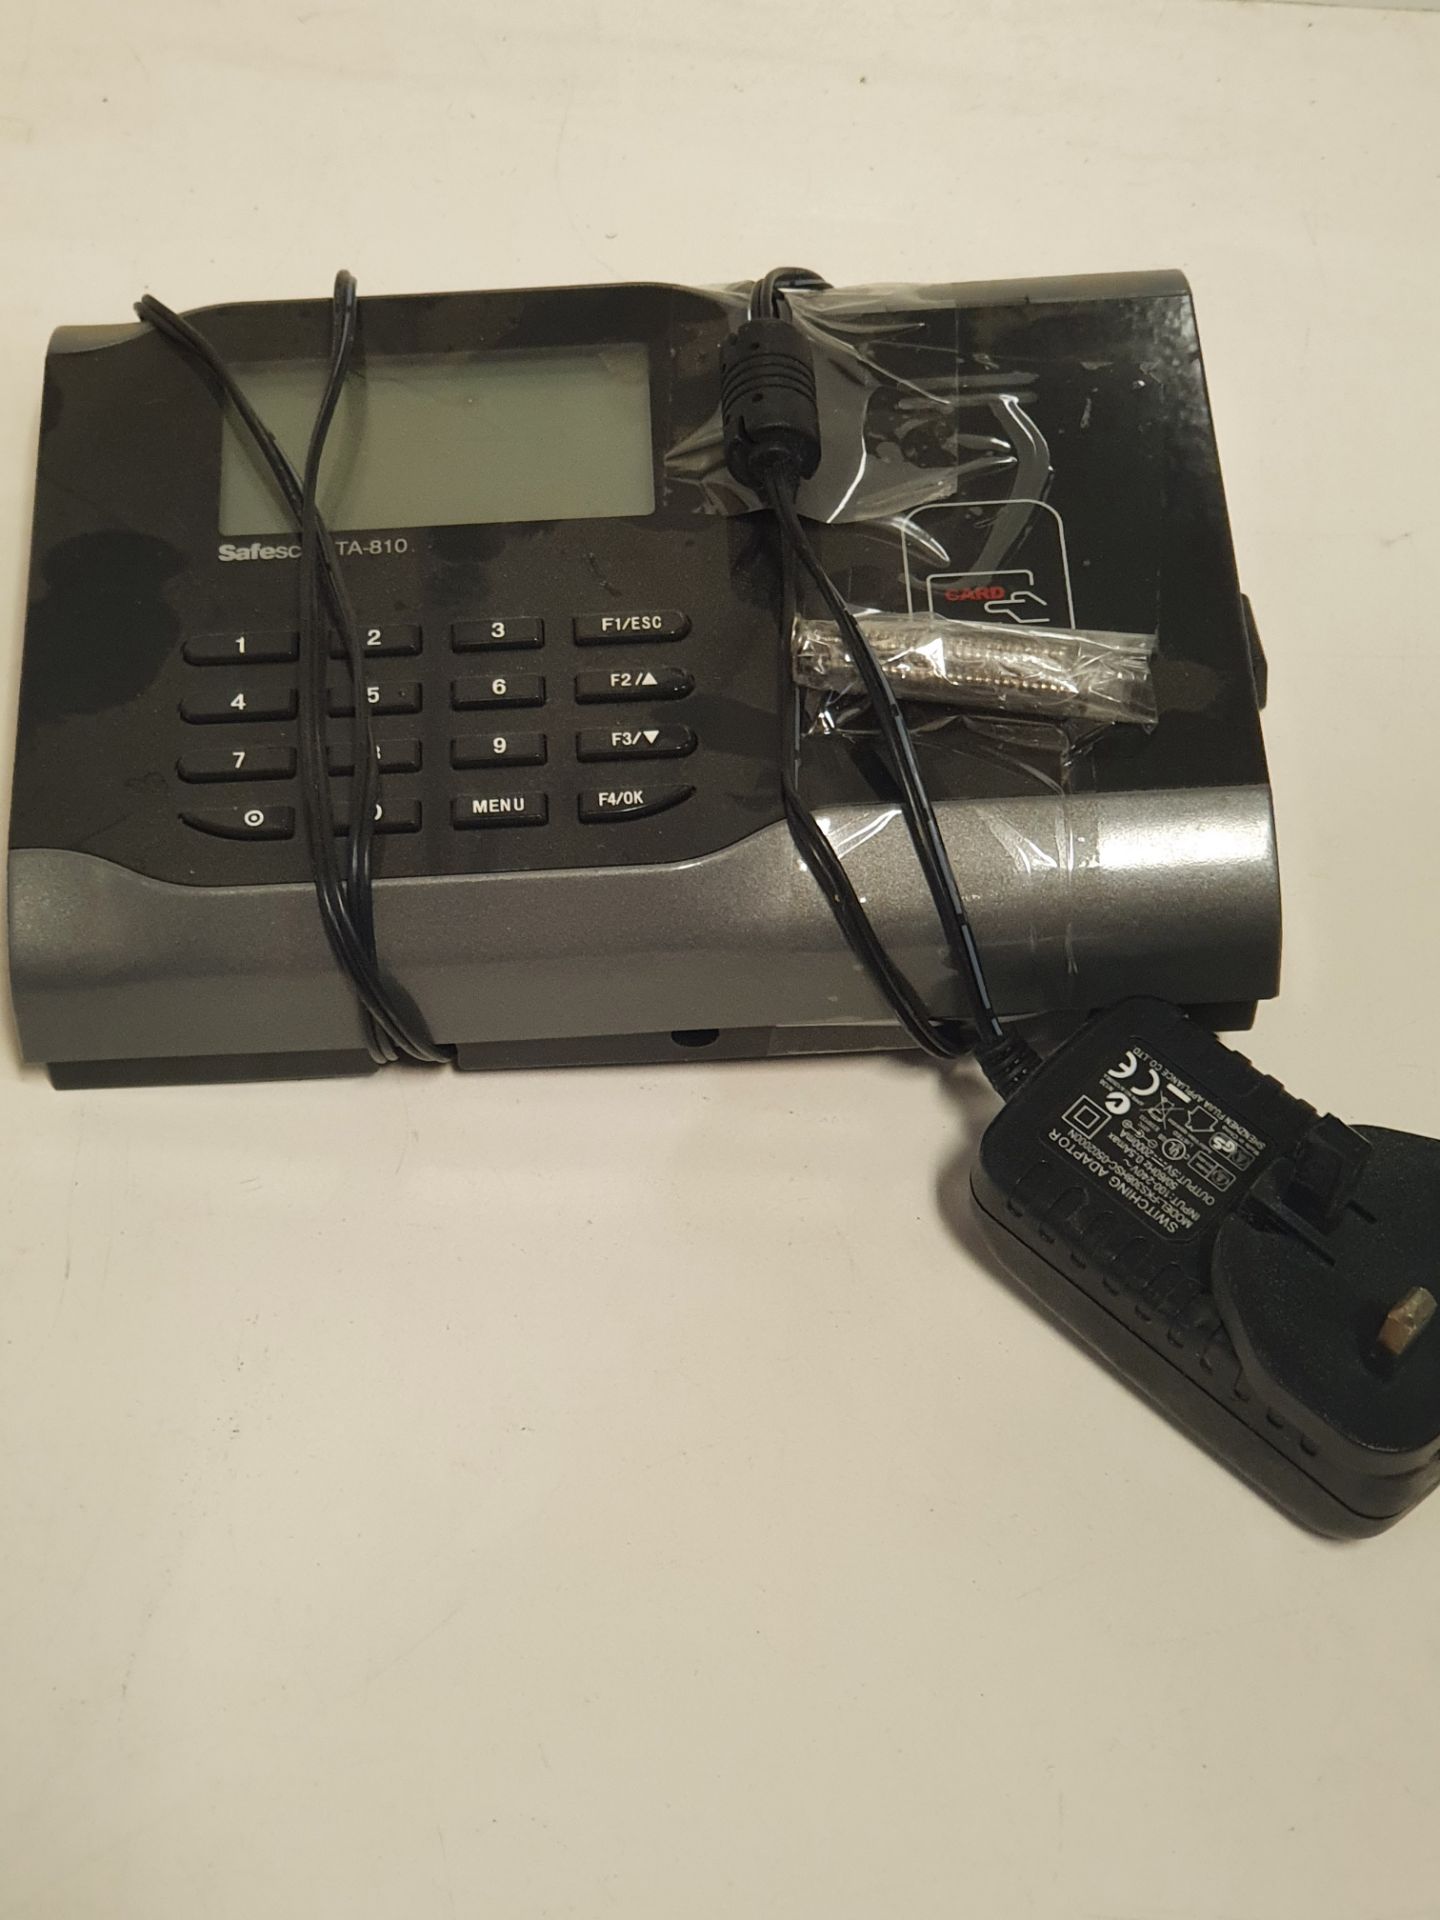 3 x Yealink Telephones and Other Office Accessories - Image 2 of 6